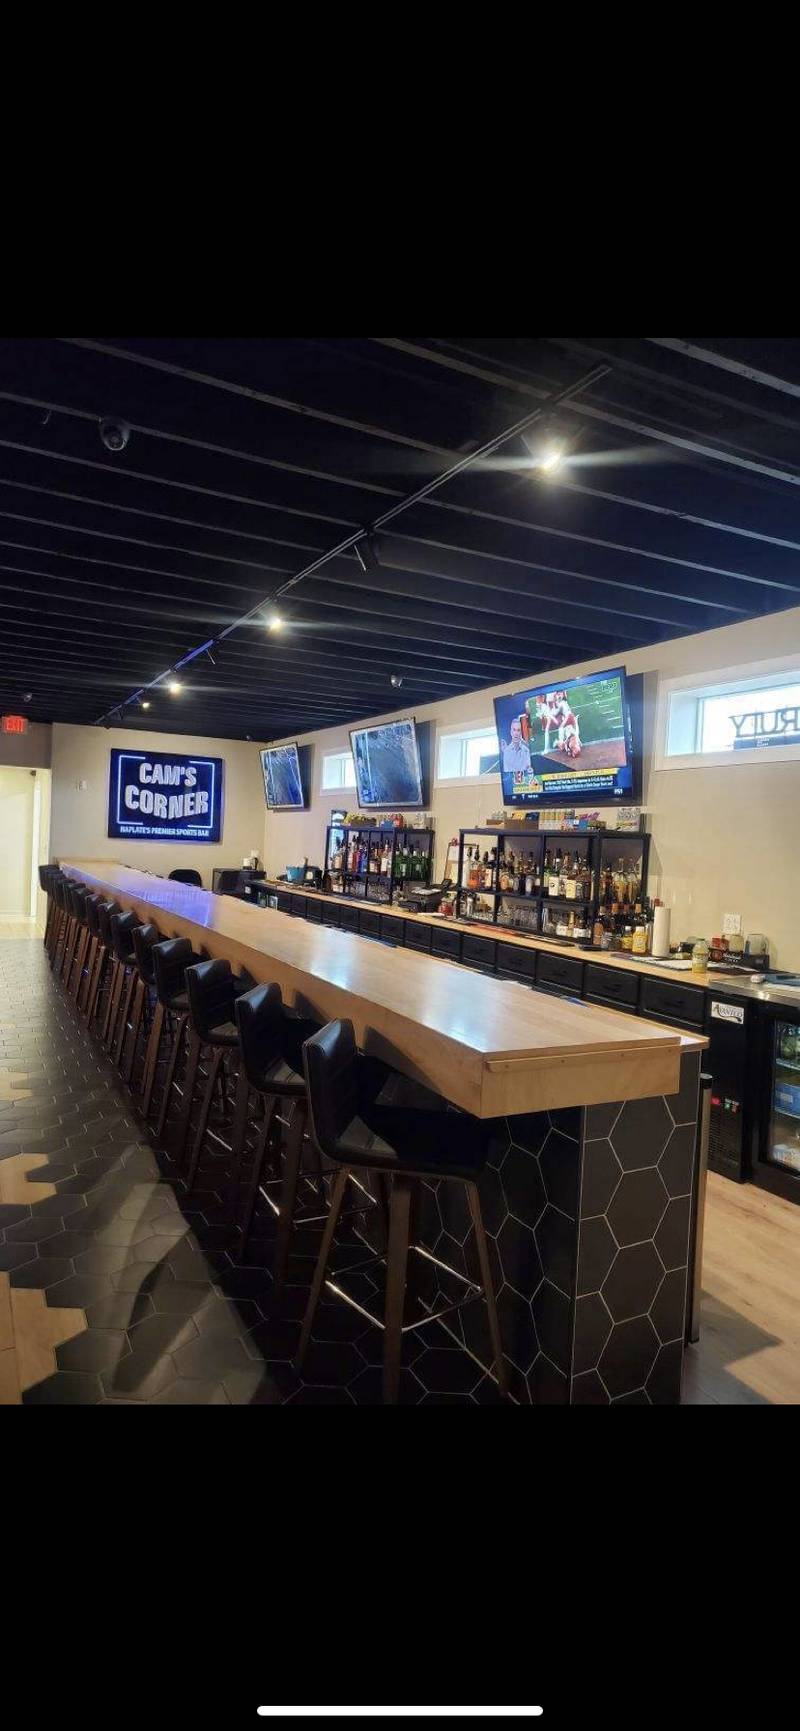 Tyler Lewis and his wife, Abby, recently opened sports bar Cam’s Corner in Naplate.